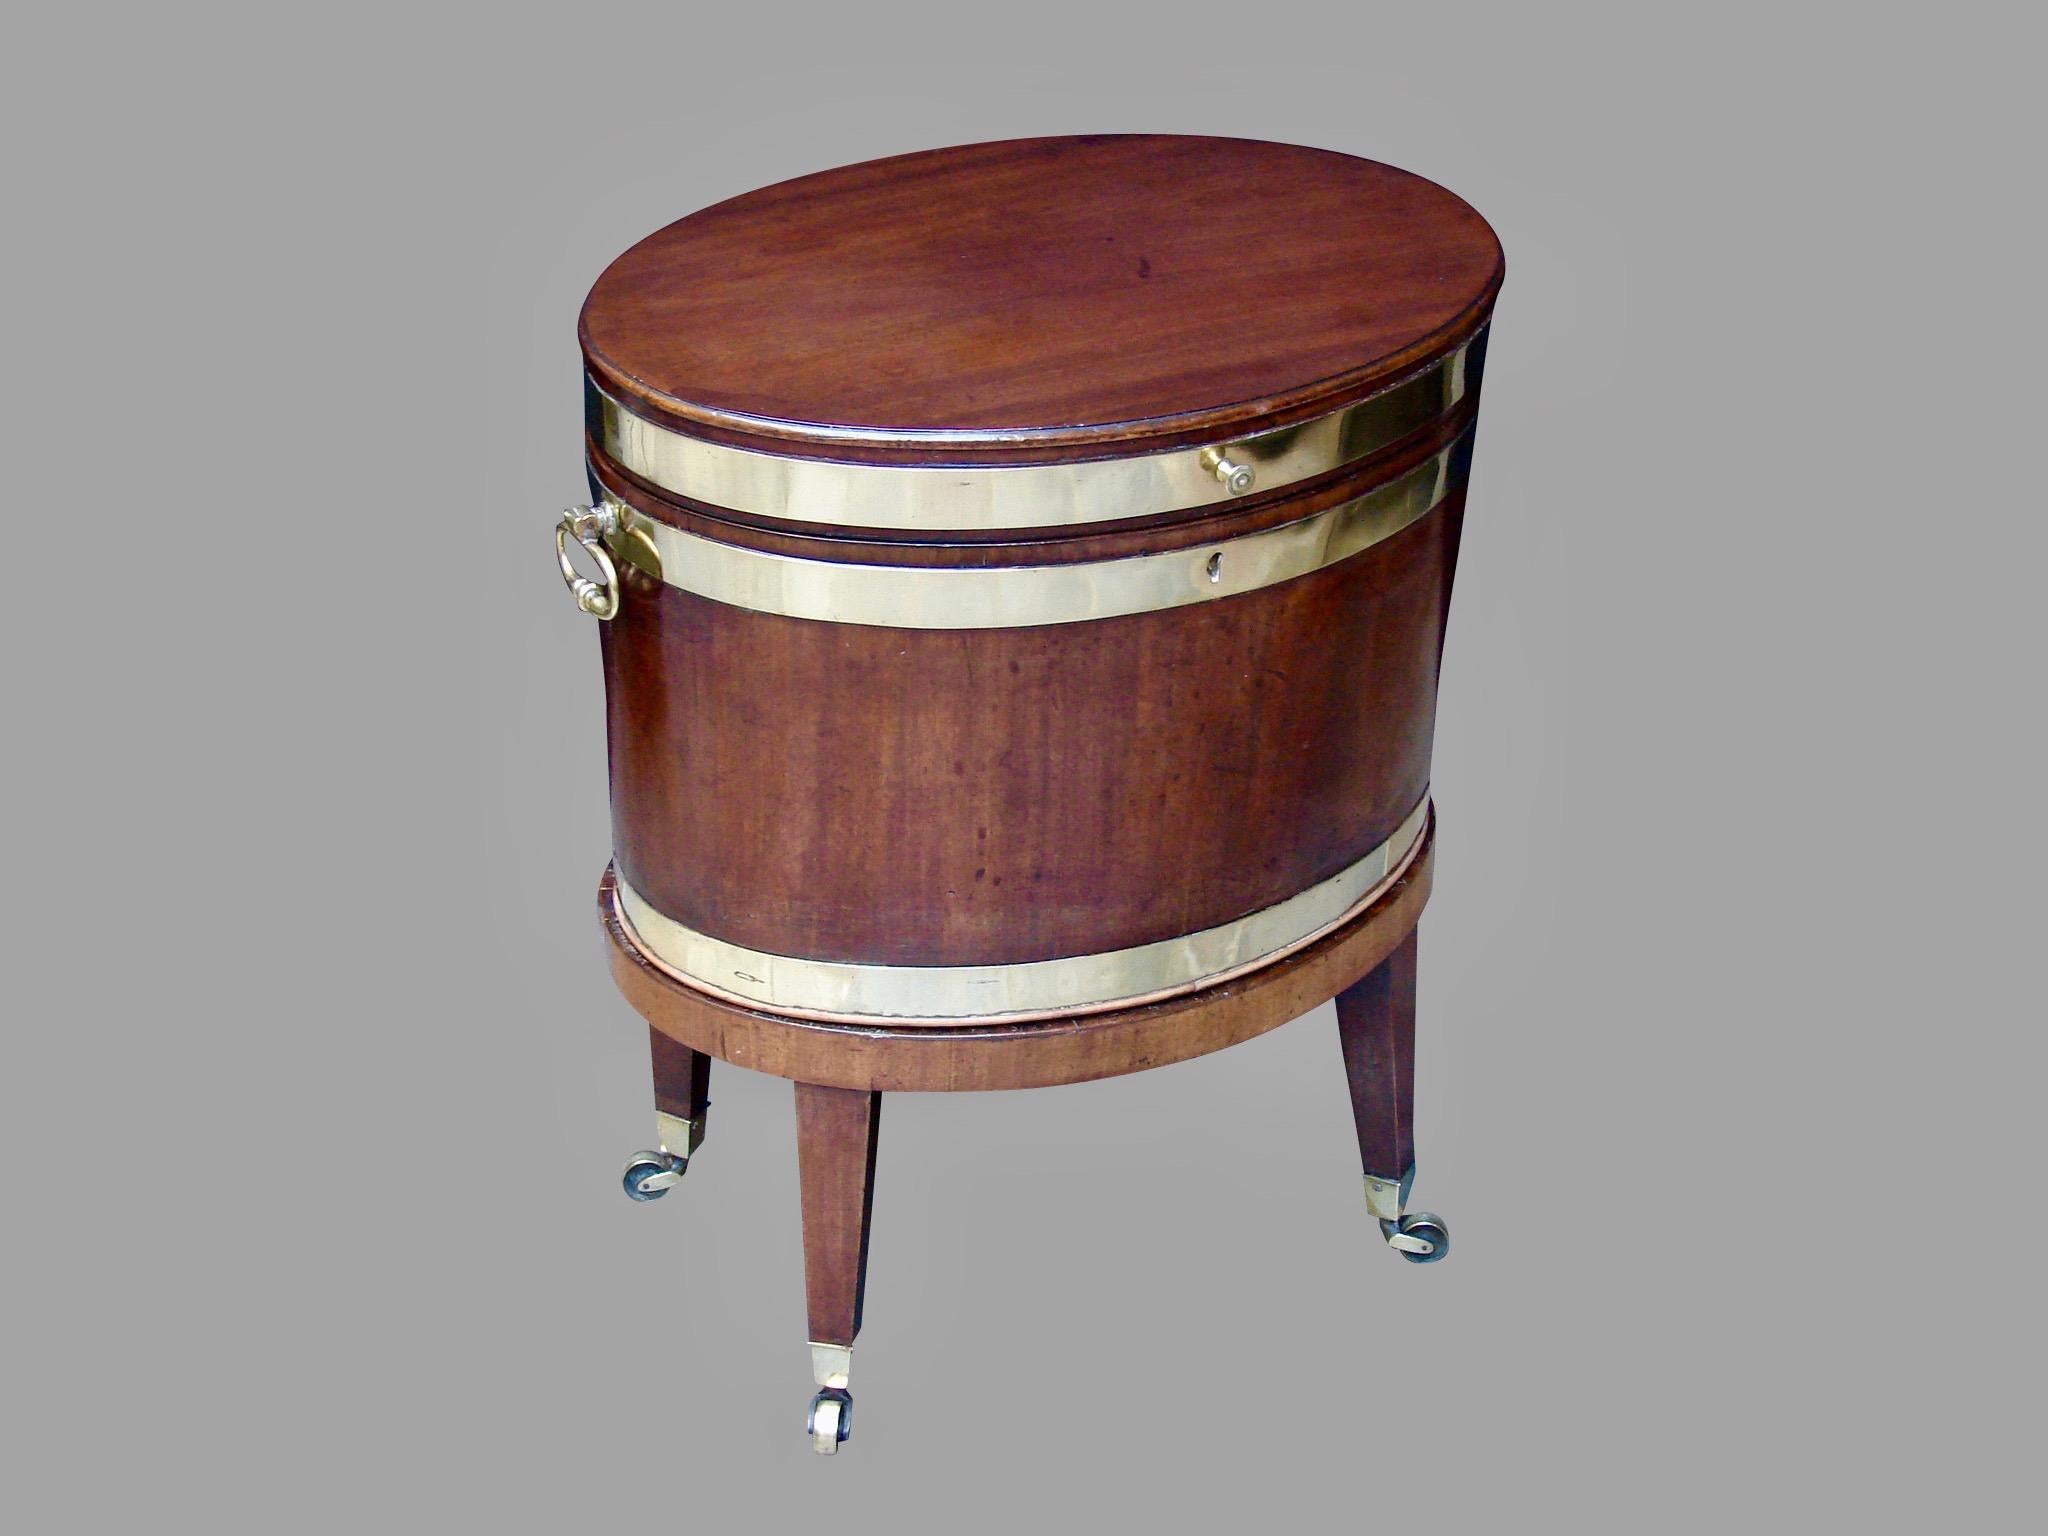 A George III mahogany brass-banded oval cellarette with side carry-handles, retaining its original stand with square tapered legs ending on casters, circa 1790.